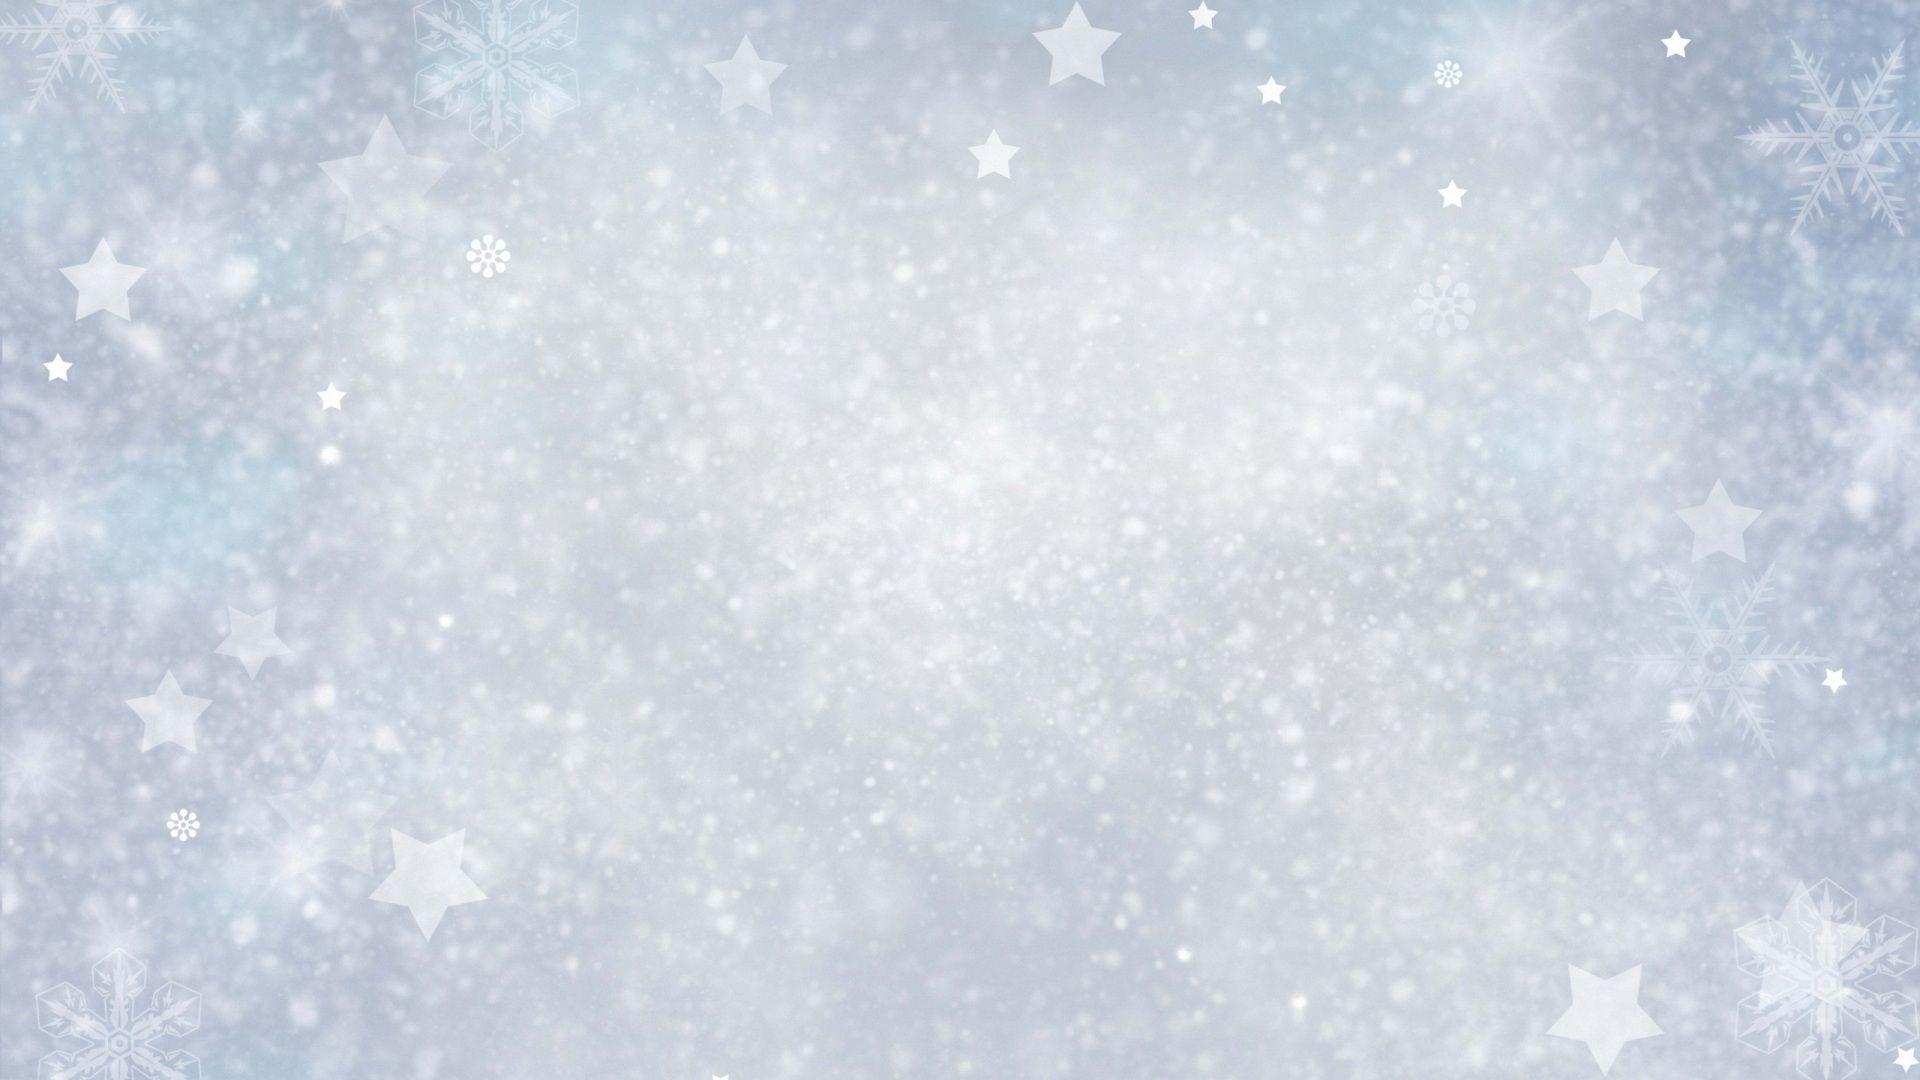 Collection of Christmas Snowflakes Wallpaper on HDWallpaper 1920x1080